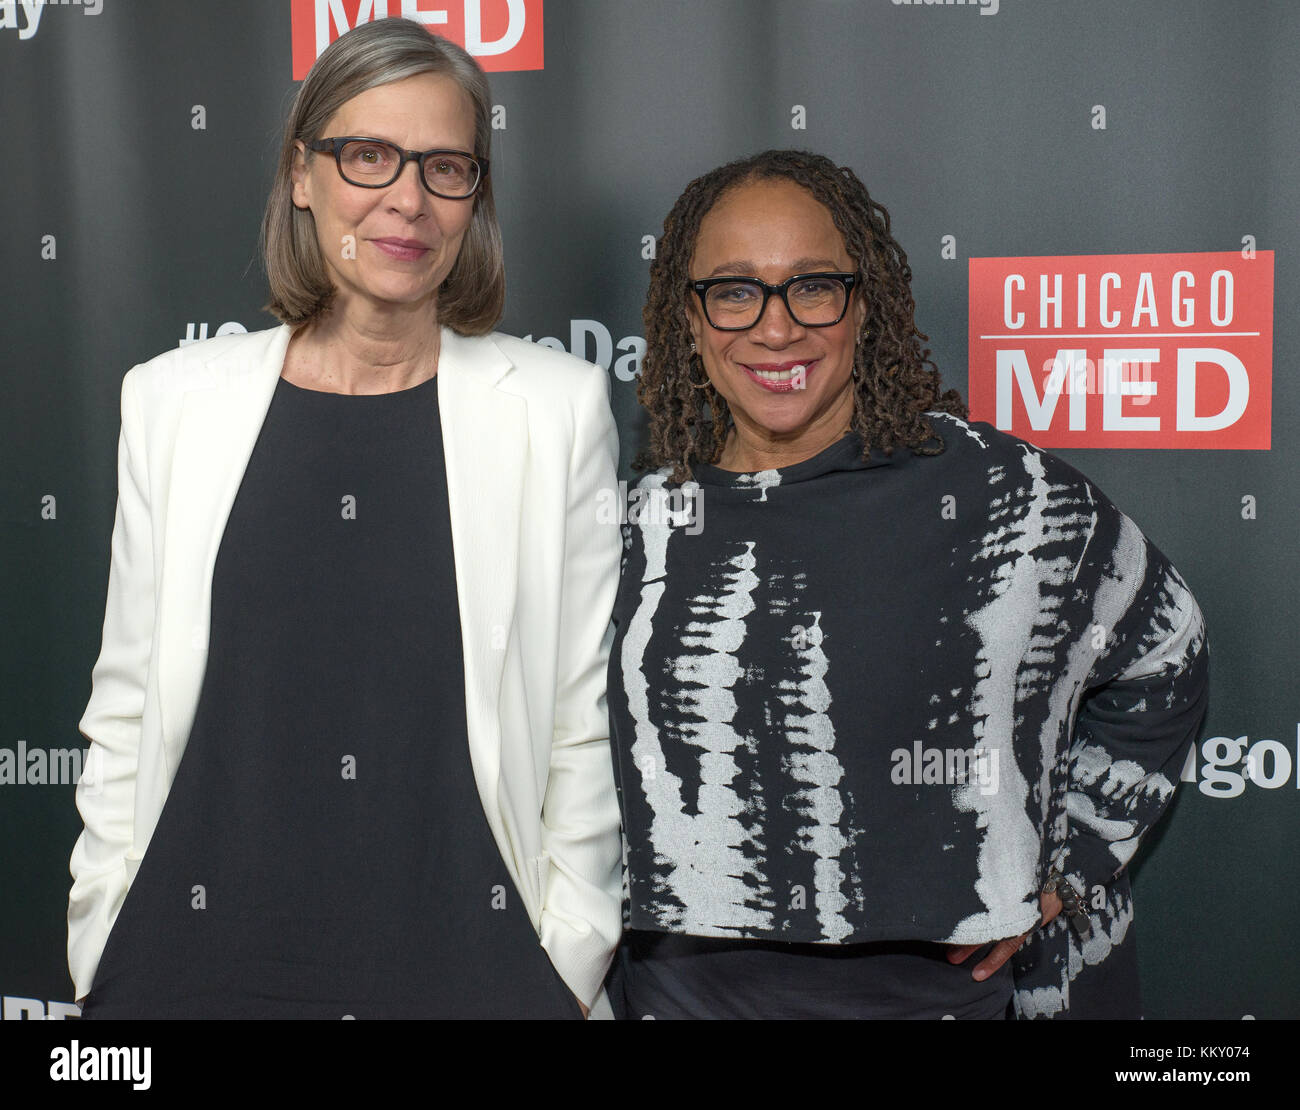 3rd annual NBC One Chicago Party featuring cast members from Chicago Fire, Chicago Med and Chicago P.D - Arrivals  Featuring: Amy Morton, S. Epatha Merkerson Where: Chicago, Illinois, United States When: 31 Oct 2017 Credit: WENN Stock Photo